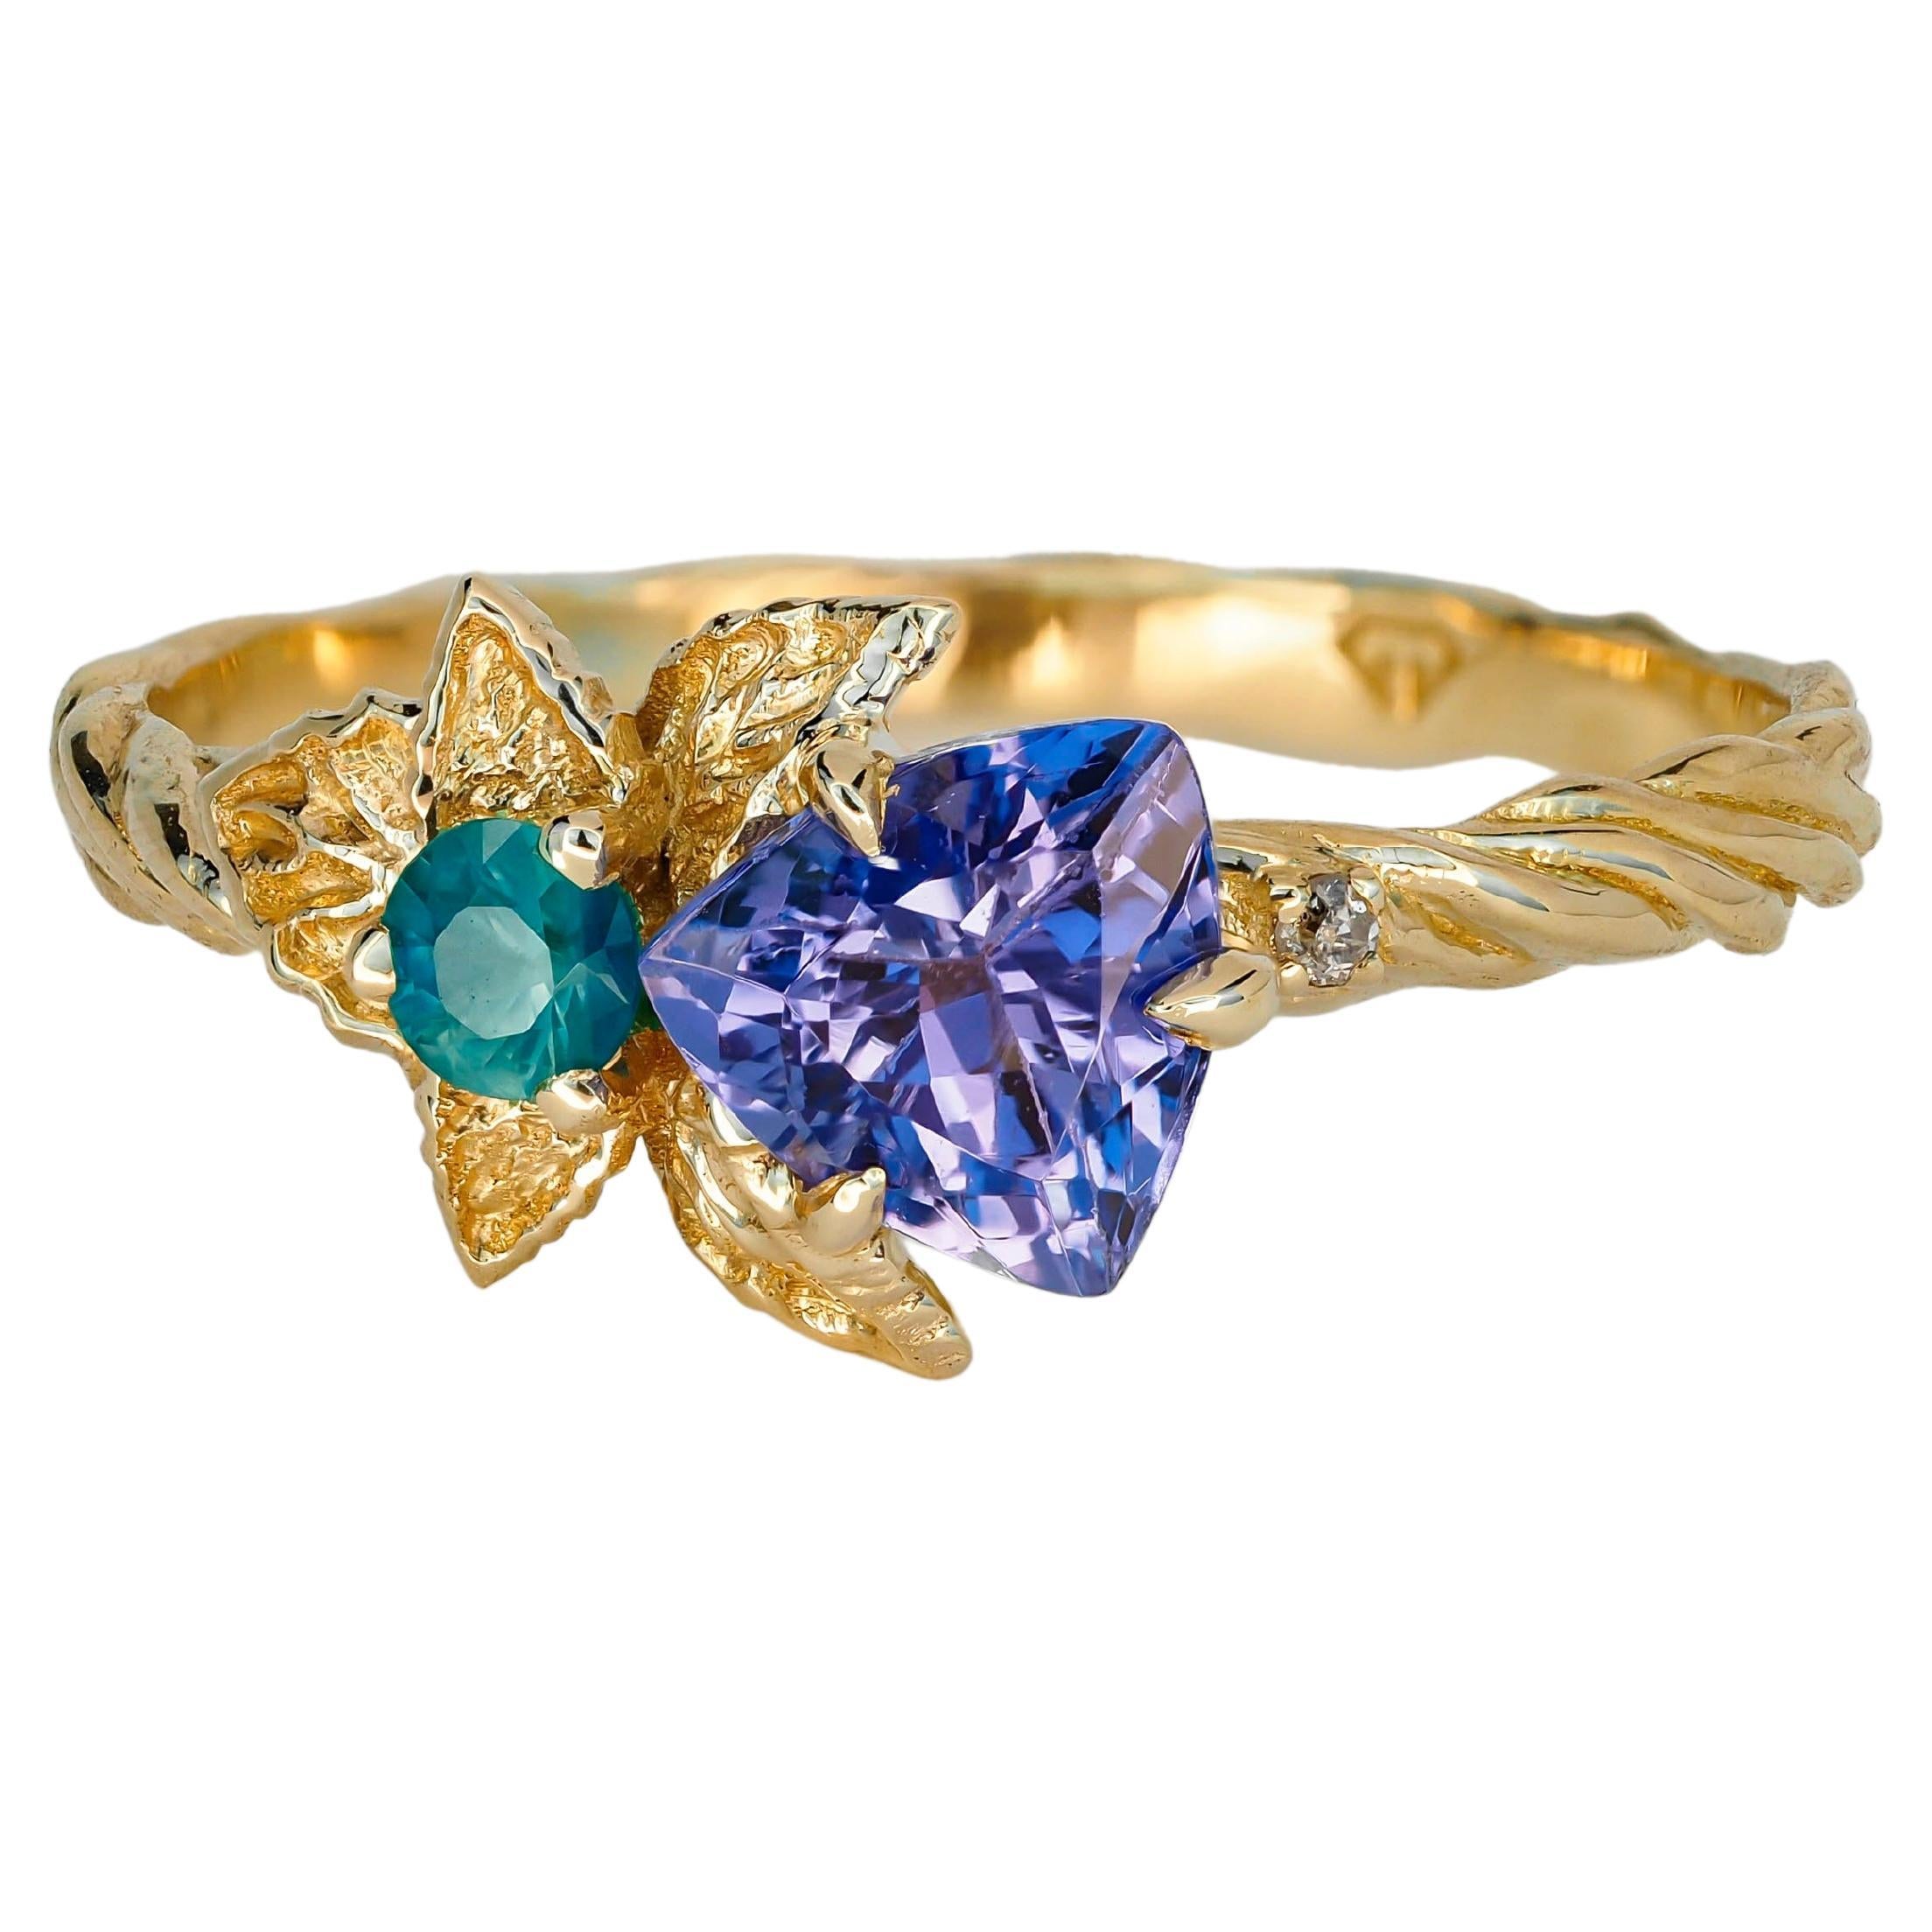 For Sale:  Tanzanite and diamonds 14k gold ring. Flower design ring with tanzanite. 5